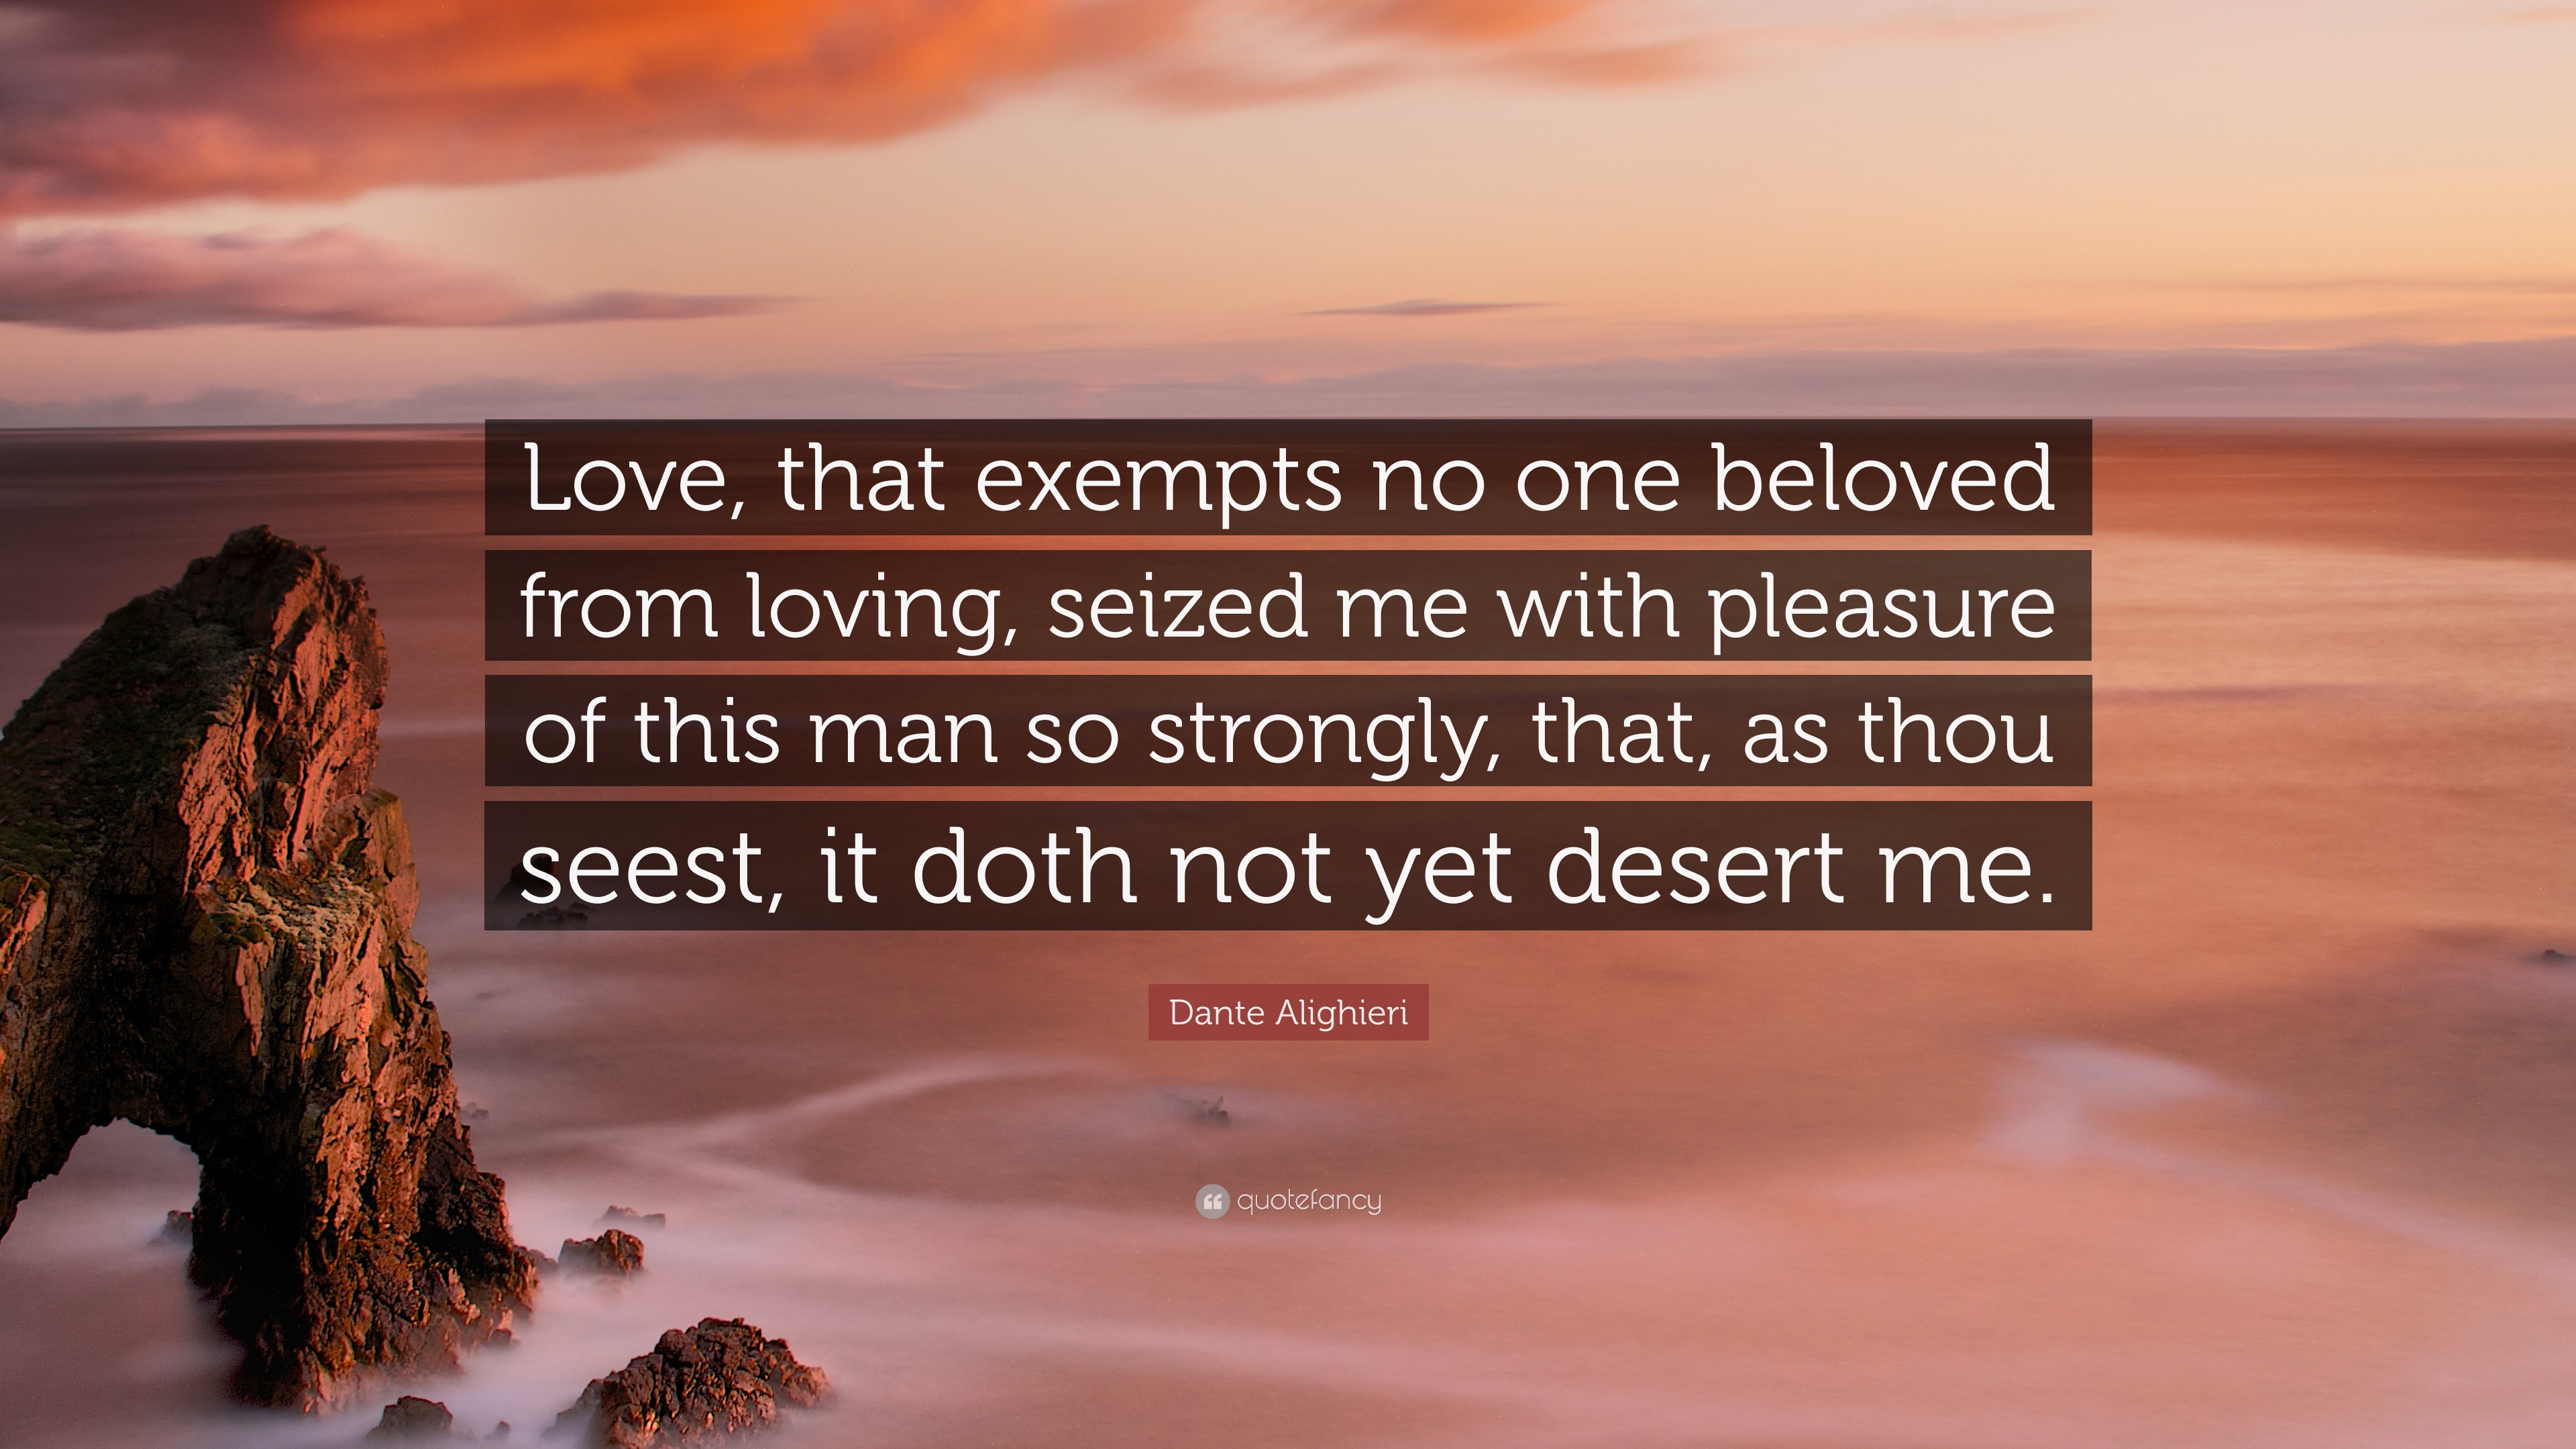 Dante's Inferno: “Love, that excuses no one loved from loving